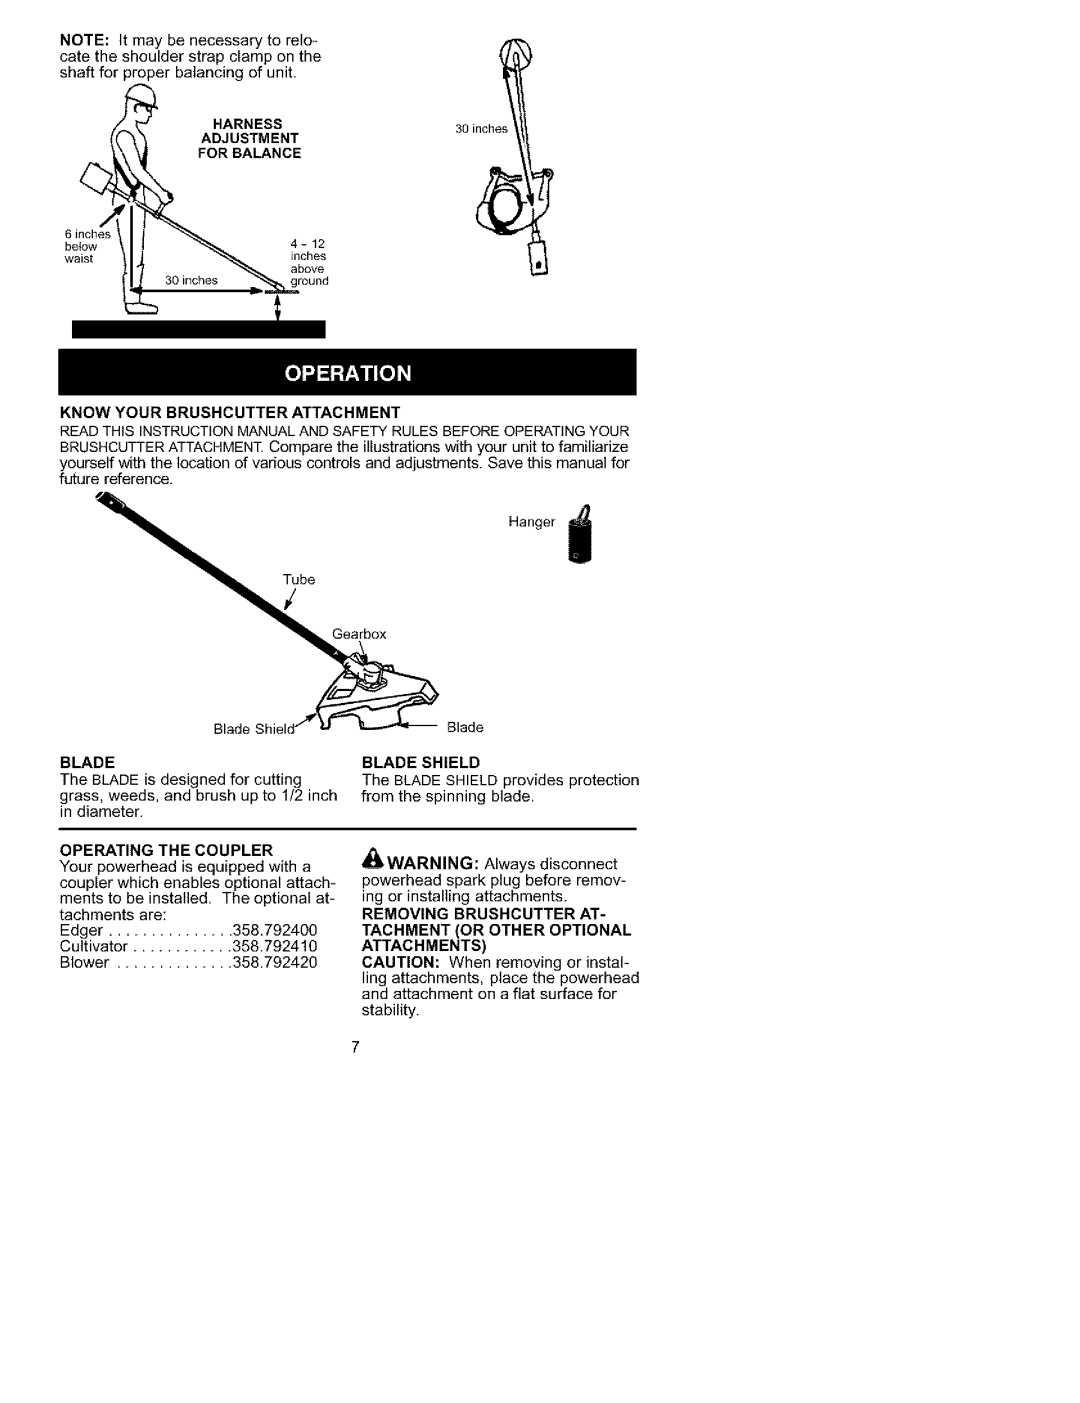 Craftsman 358.792430 Know Your Brushcutter Attachment, Operating The Coupler, Blade Shield, Attachments 